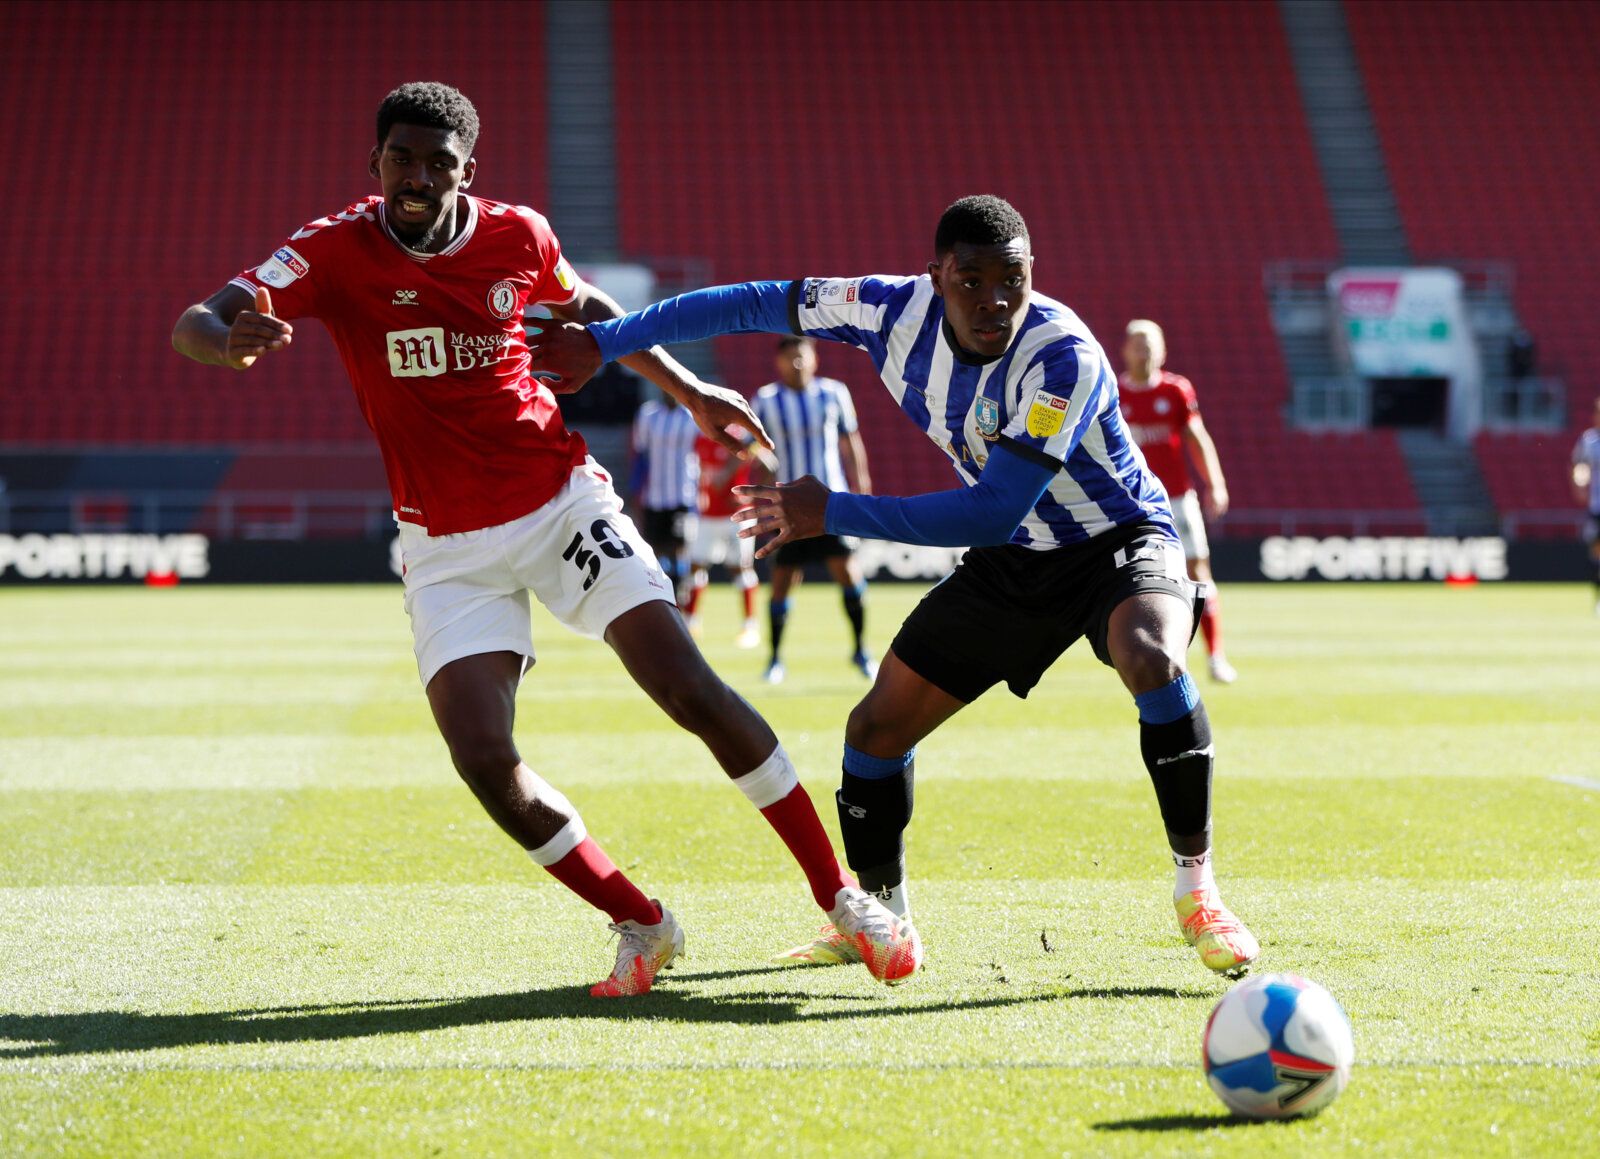 Soccer Football - Championship - Bristol City v Sheffield Wednesday - Ashton Gate Stadium, Bristol, Britain - September 27, 2020  Bristol City's Tyreeq Bakinson in action with Sheffield Wednesday's Fisayo Dele-Bashiru   Action Images/Paul Childs  EDITORIAL USE ONLY. No use with unauthorized audio, video, data, fixture lists, club/league logos or 